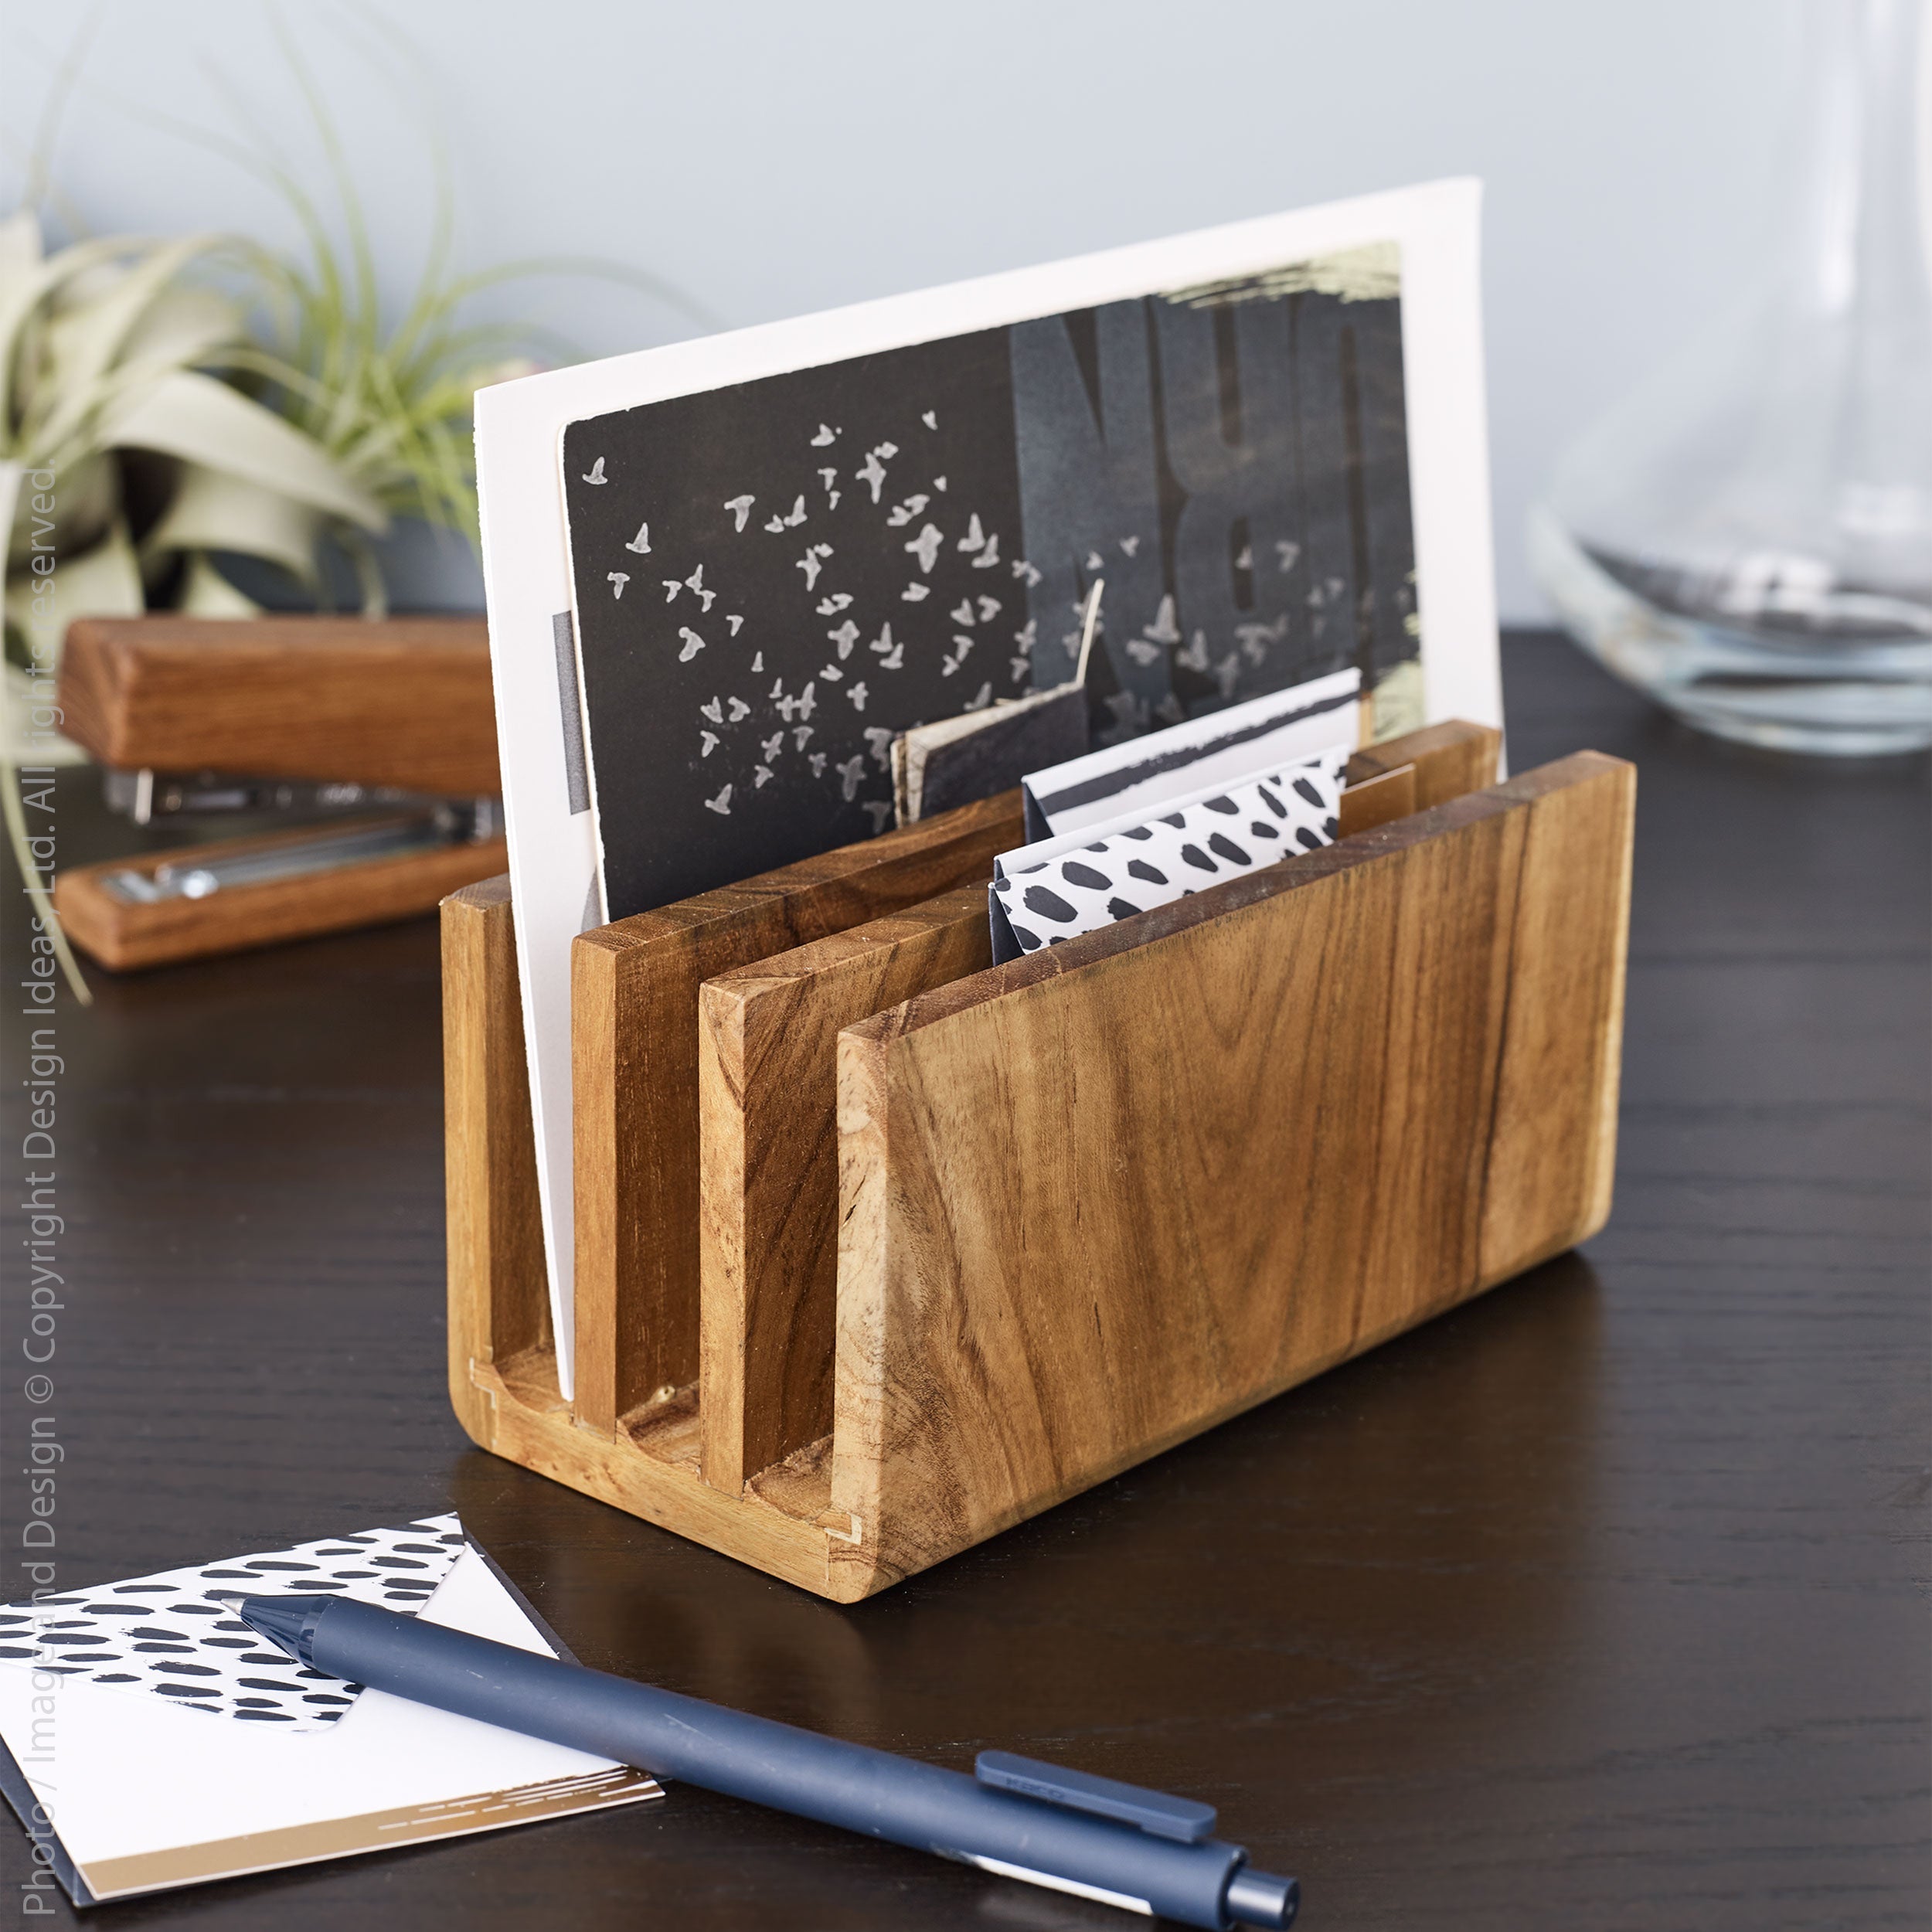 Takara Teak Letter Sorter Natural Color | Image 2 | From the Takara Collection | Masterfully constructed with solid teak for long lasting use | This organizer is sustainably sourced | Available in clear color | texxture home